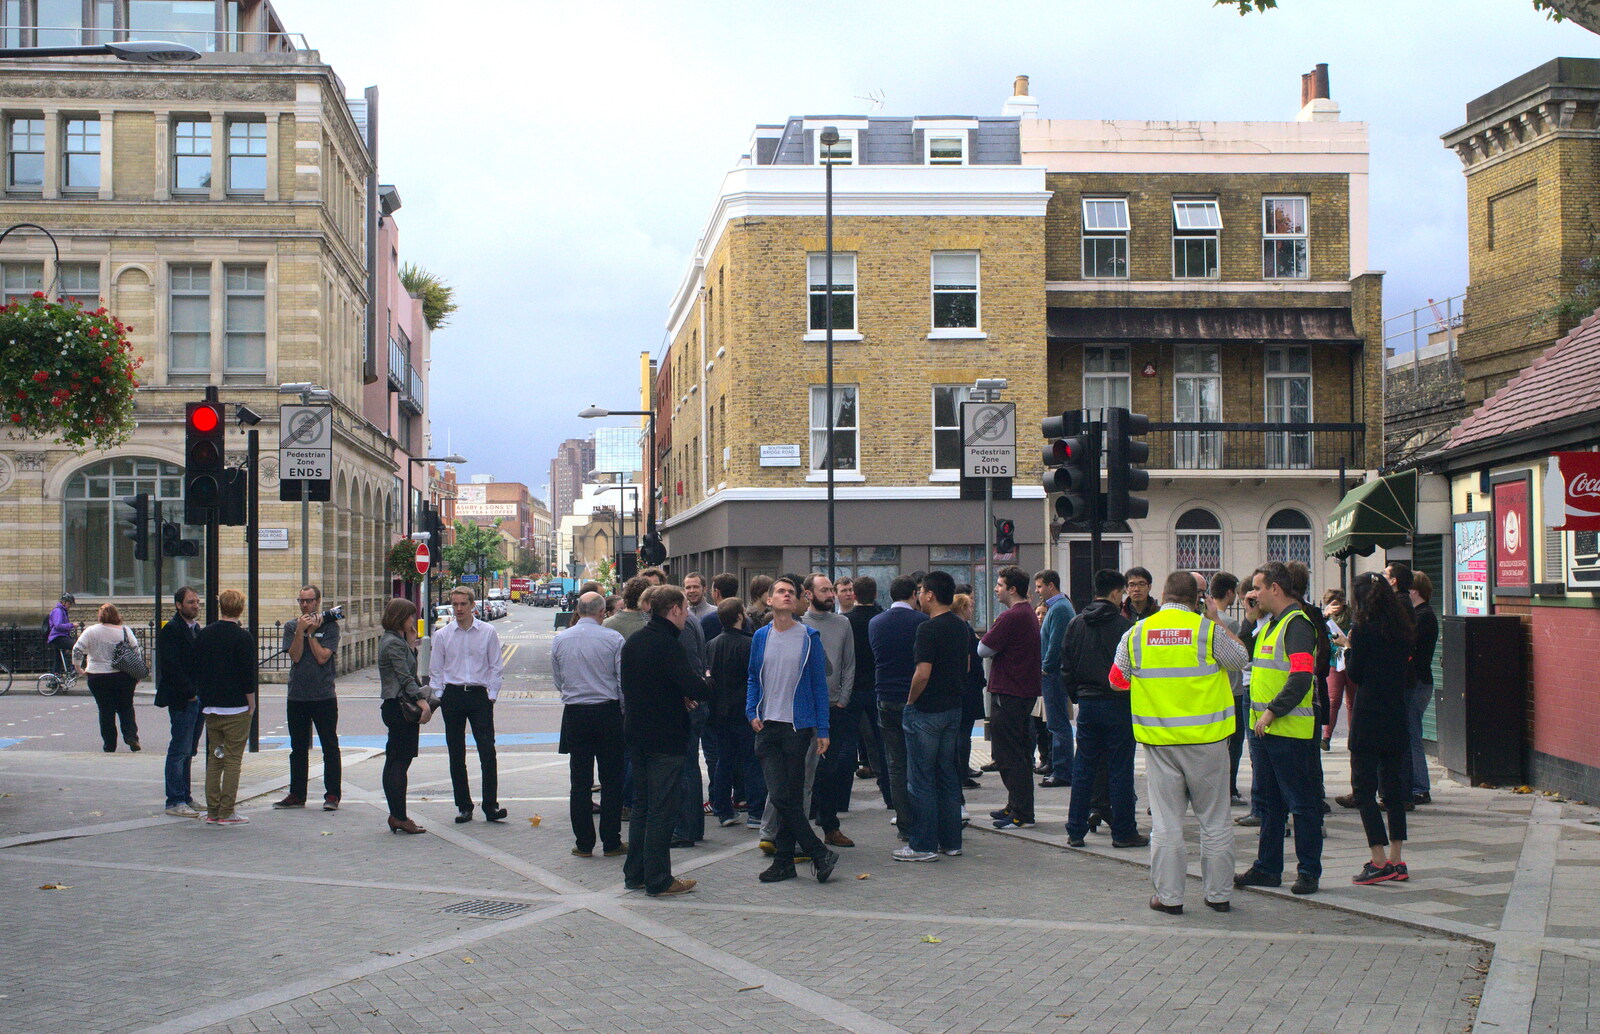 More milling around on Union Street from A TouchType Office Fire Drill, Southwark Bridge Road, London - 6th October 2012